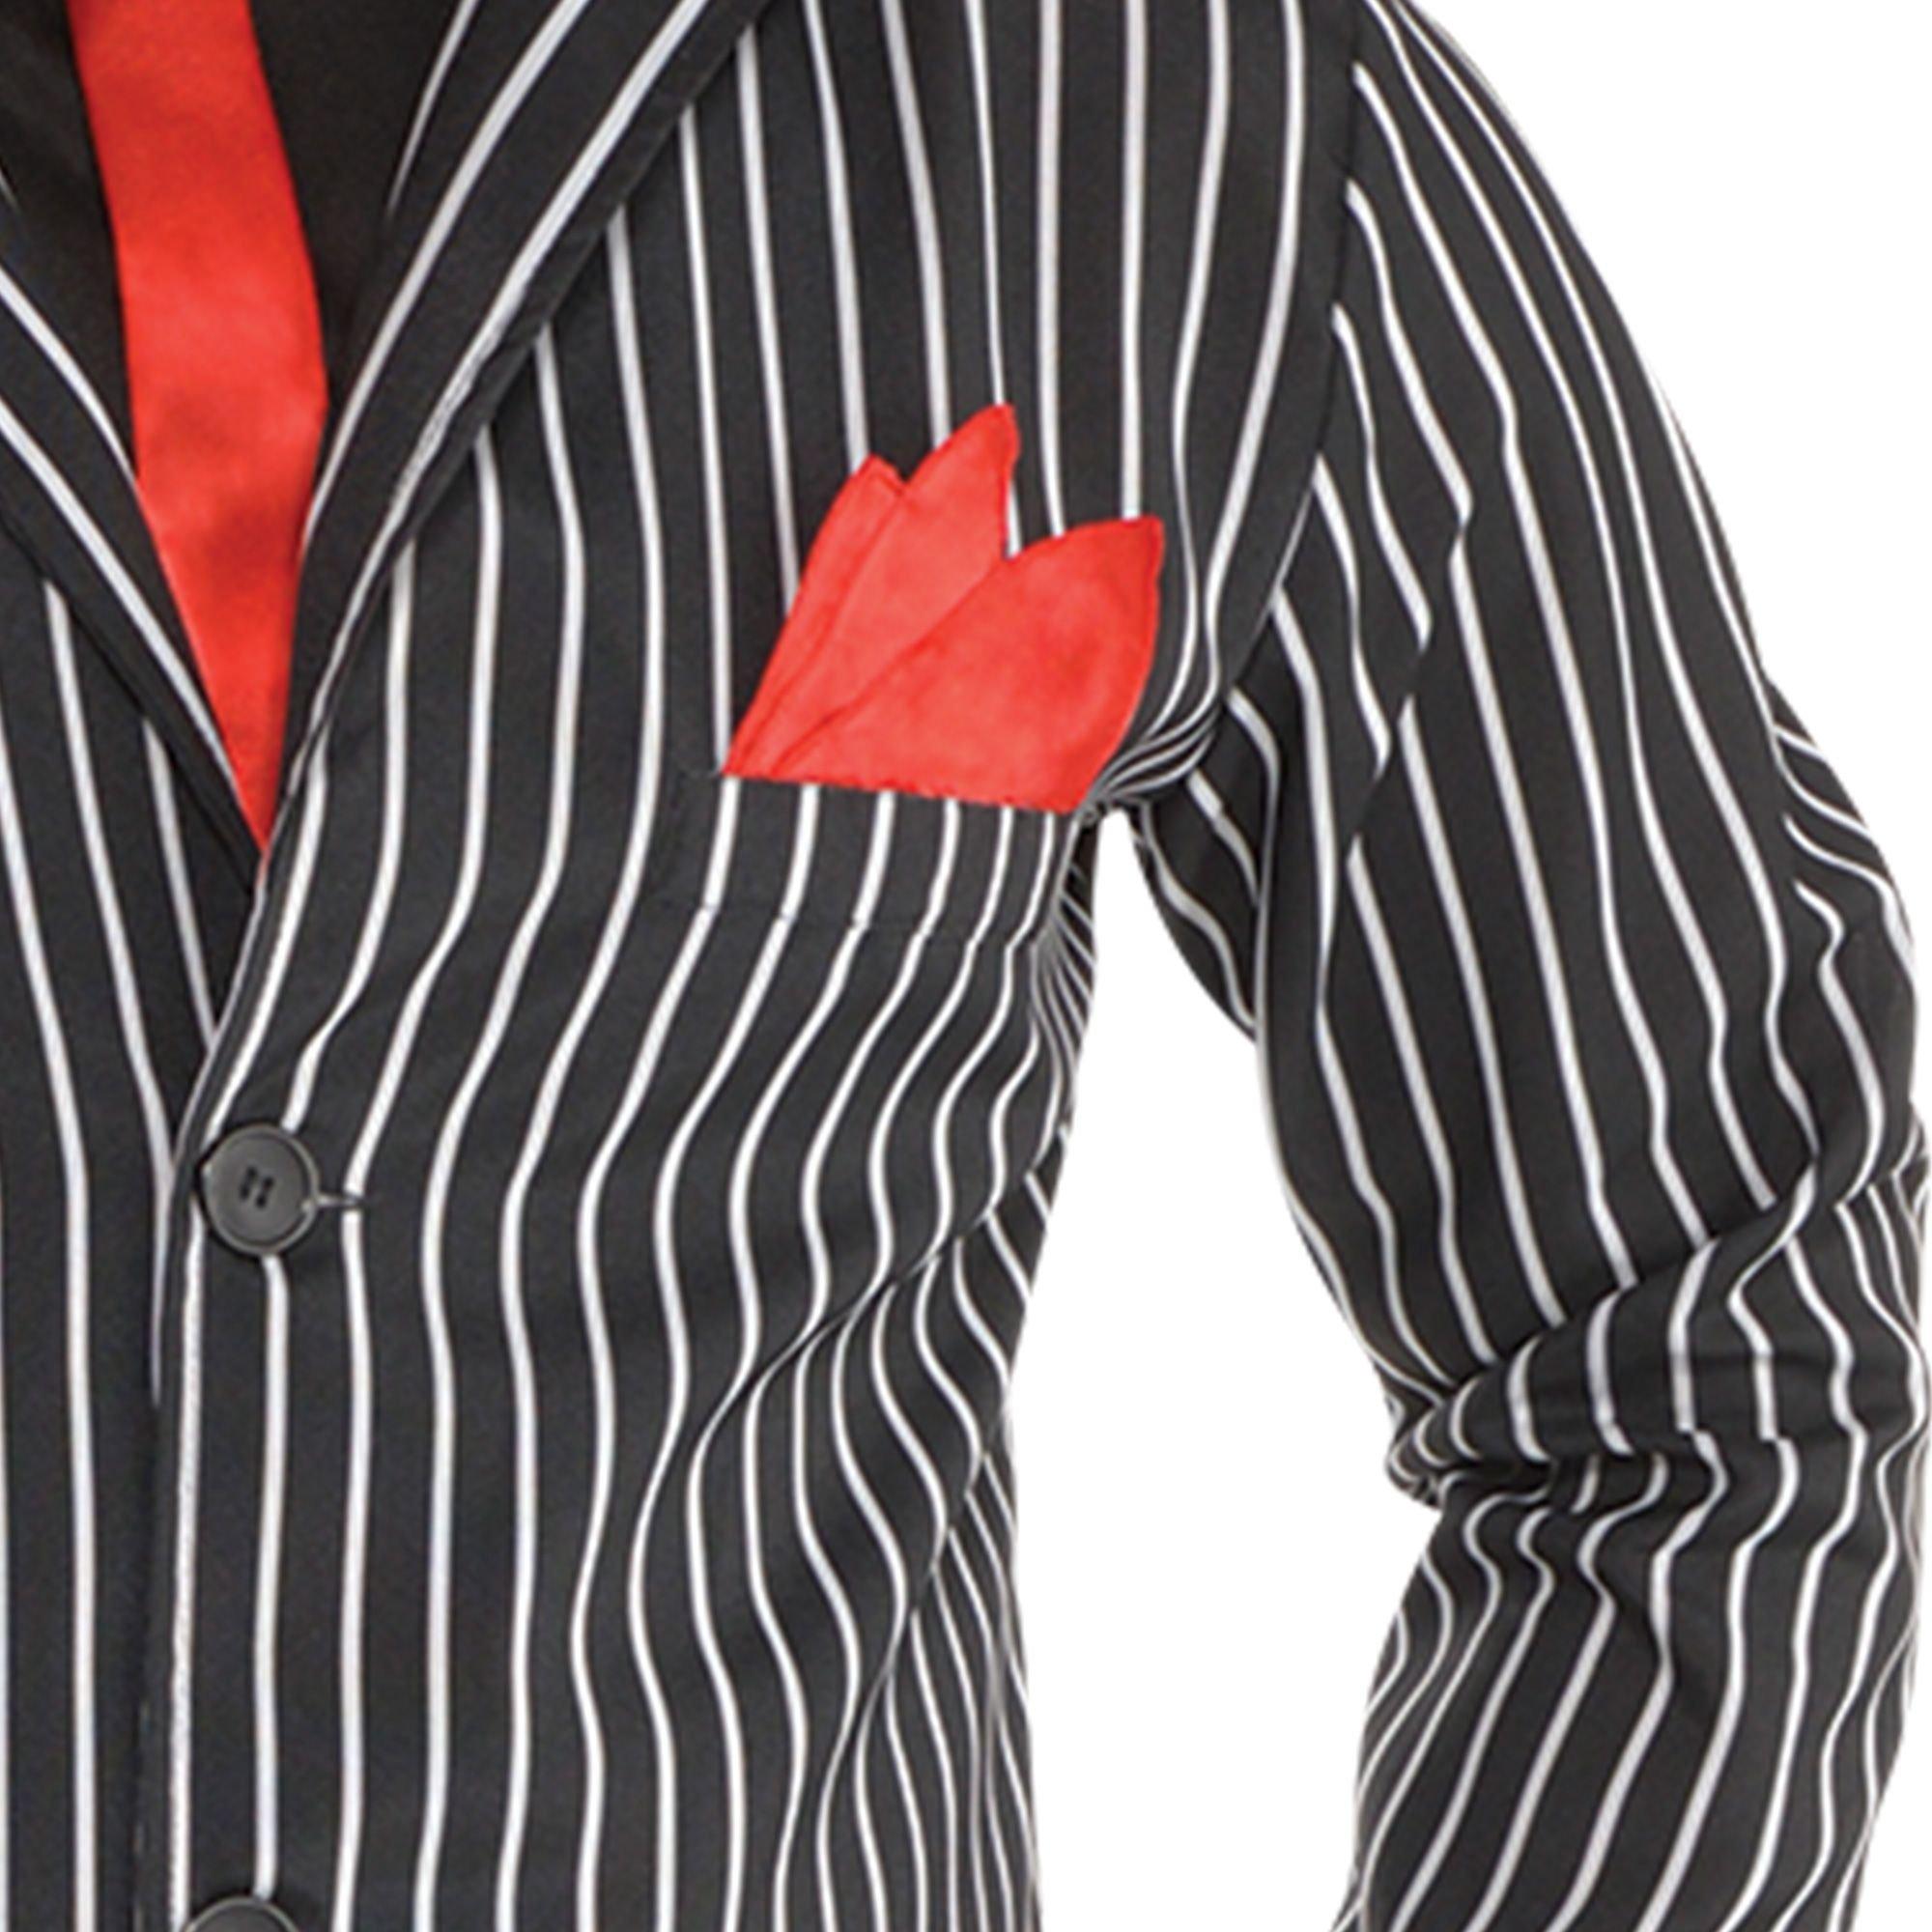 Mens Mob Boss Costume | Party City